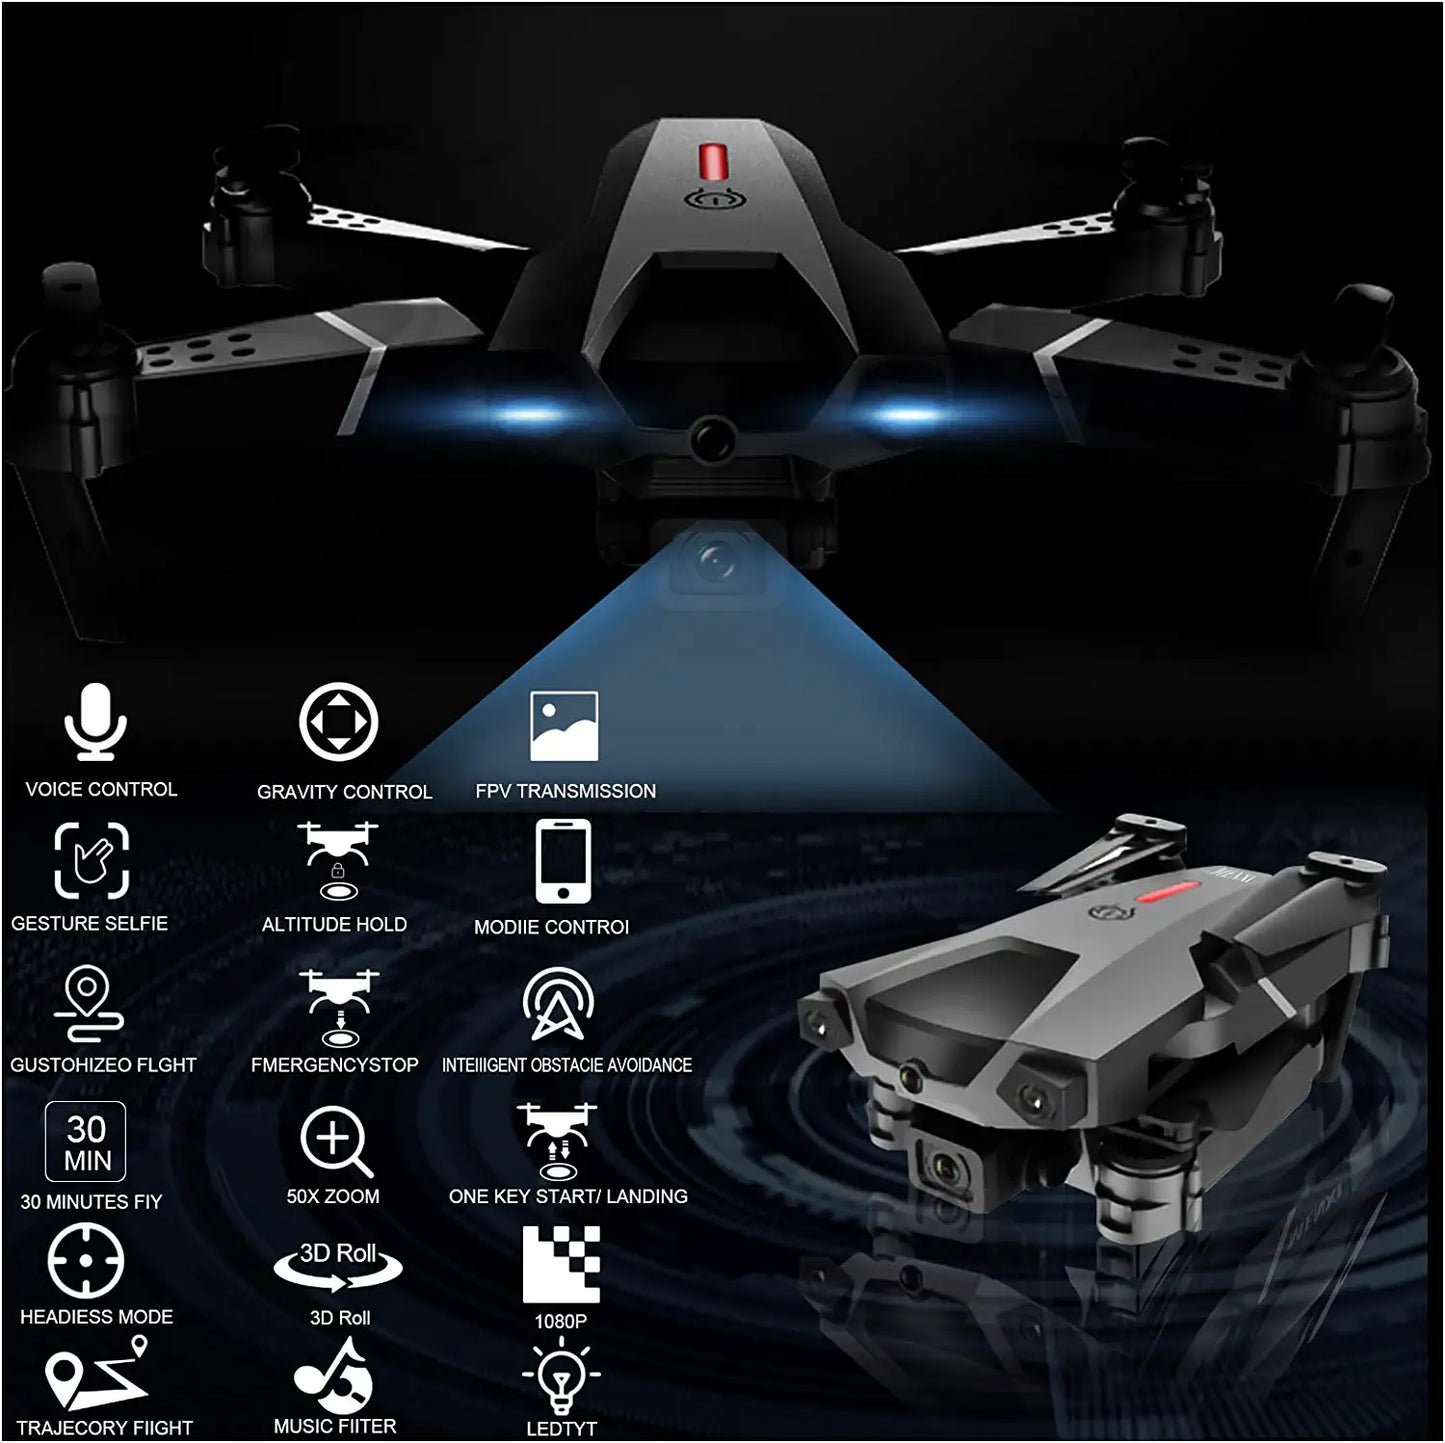 MENXI P5 Drone - with Camera for Adults Kids 1080P HD,RC Quadcopter WiFi FPV Live Video,Voice Control,Gesture Control,Altitude Hold,Headless Mode,Gravity Sensor,3 Directions of Obstacle Sensing,3D Flip - RCDrone